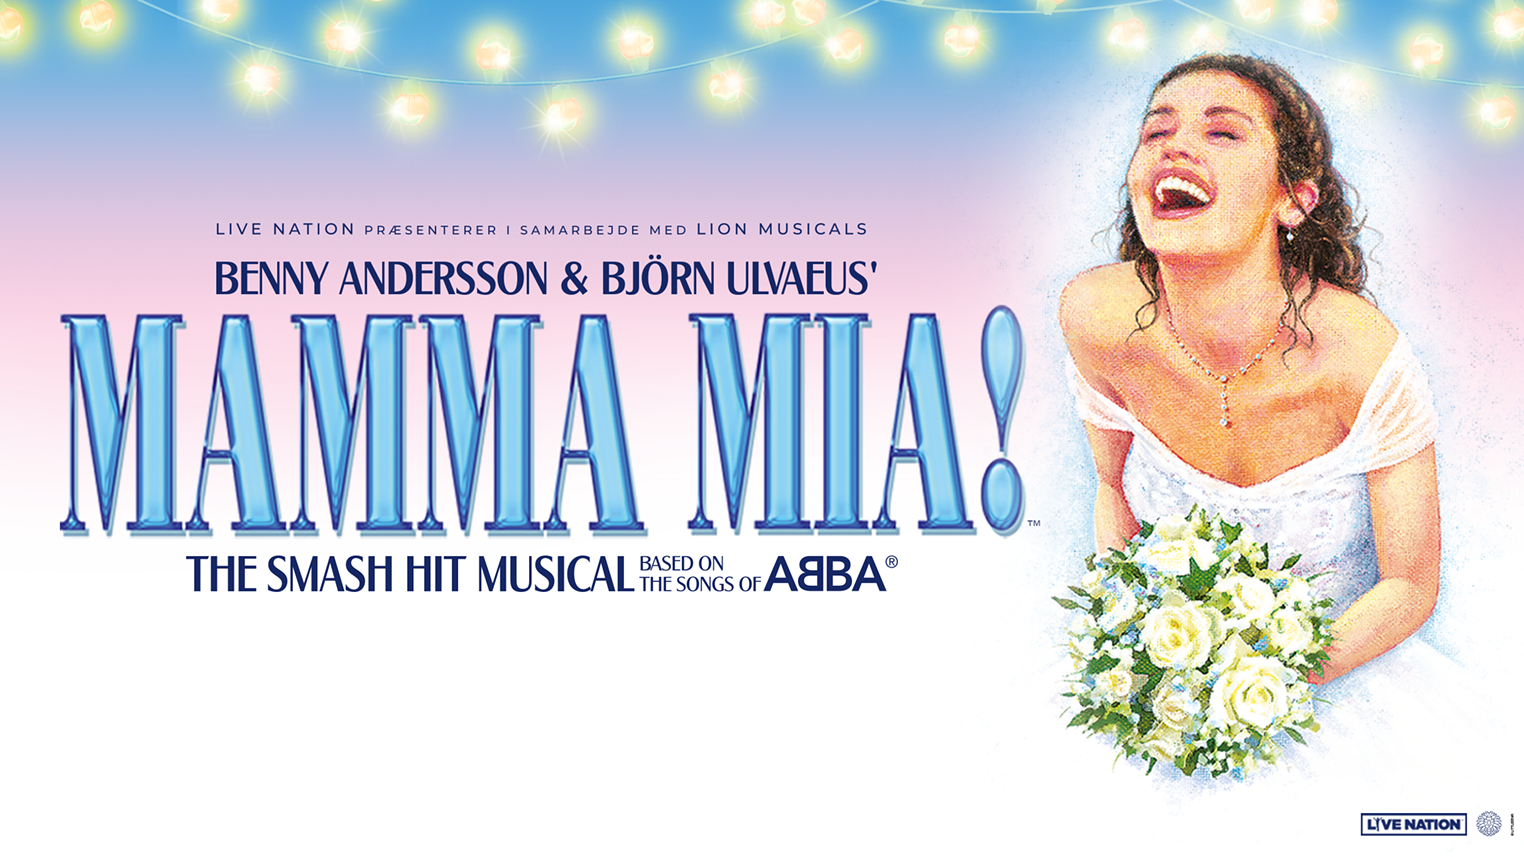 Mamma Mia Bass Performance Hall Theater Dallas Observer The Leading Independent News